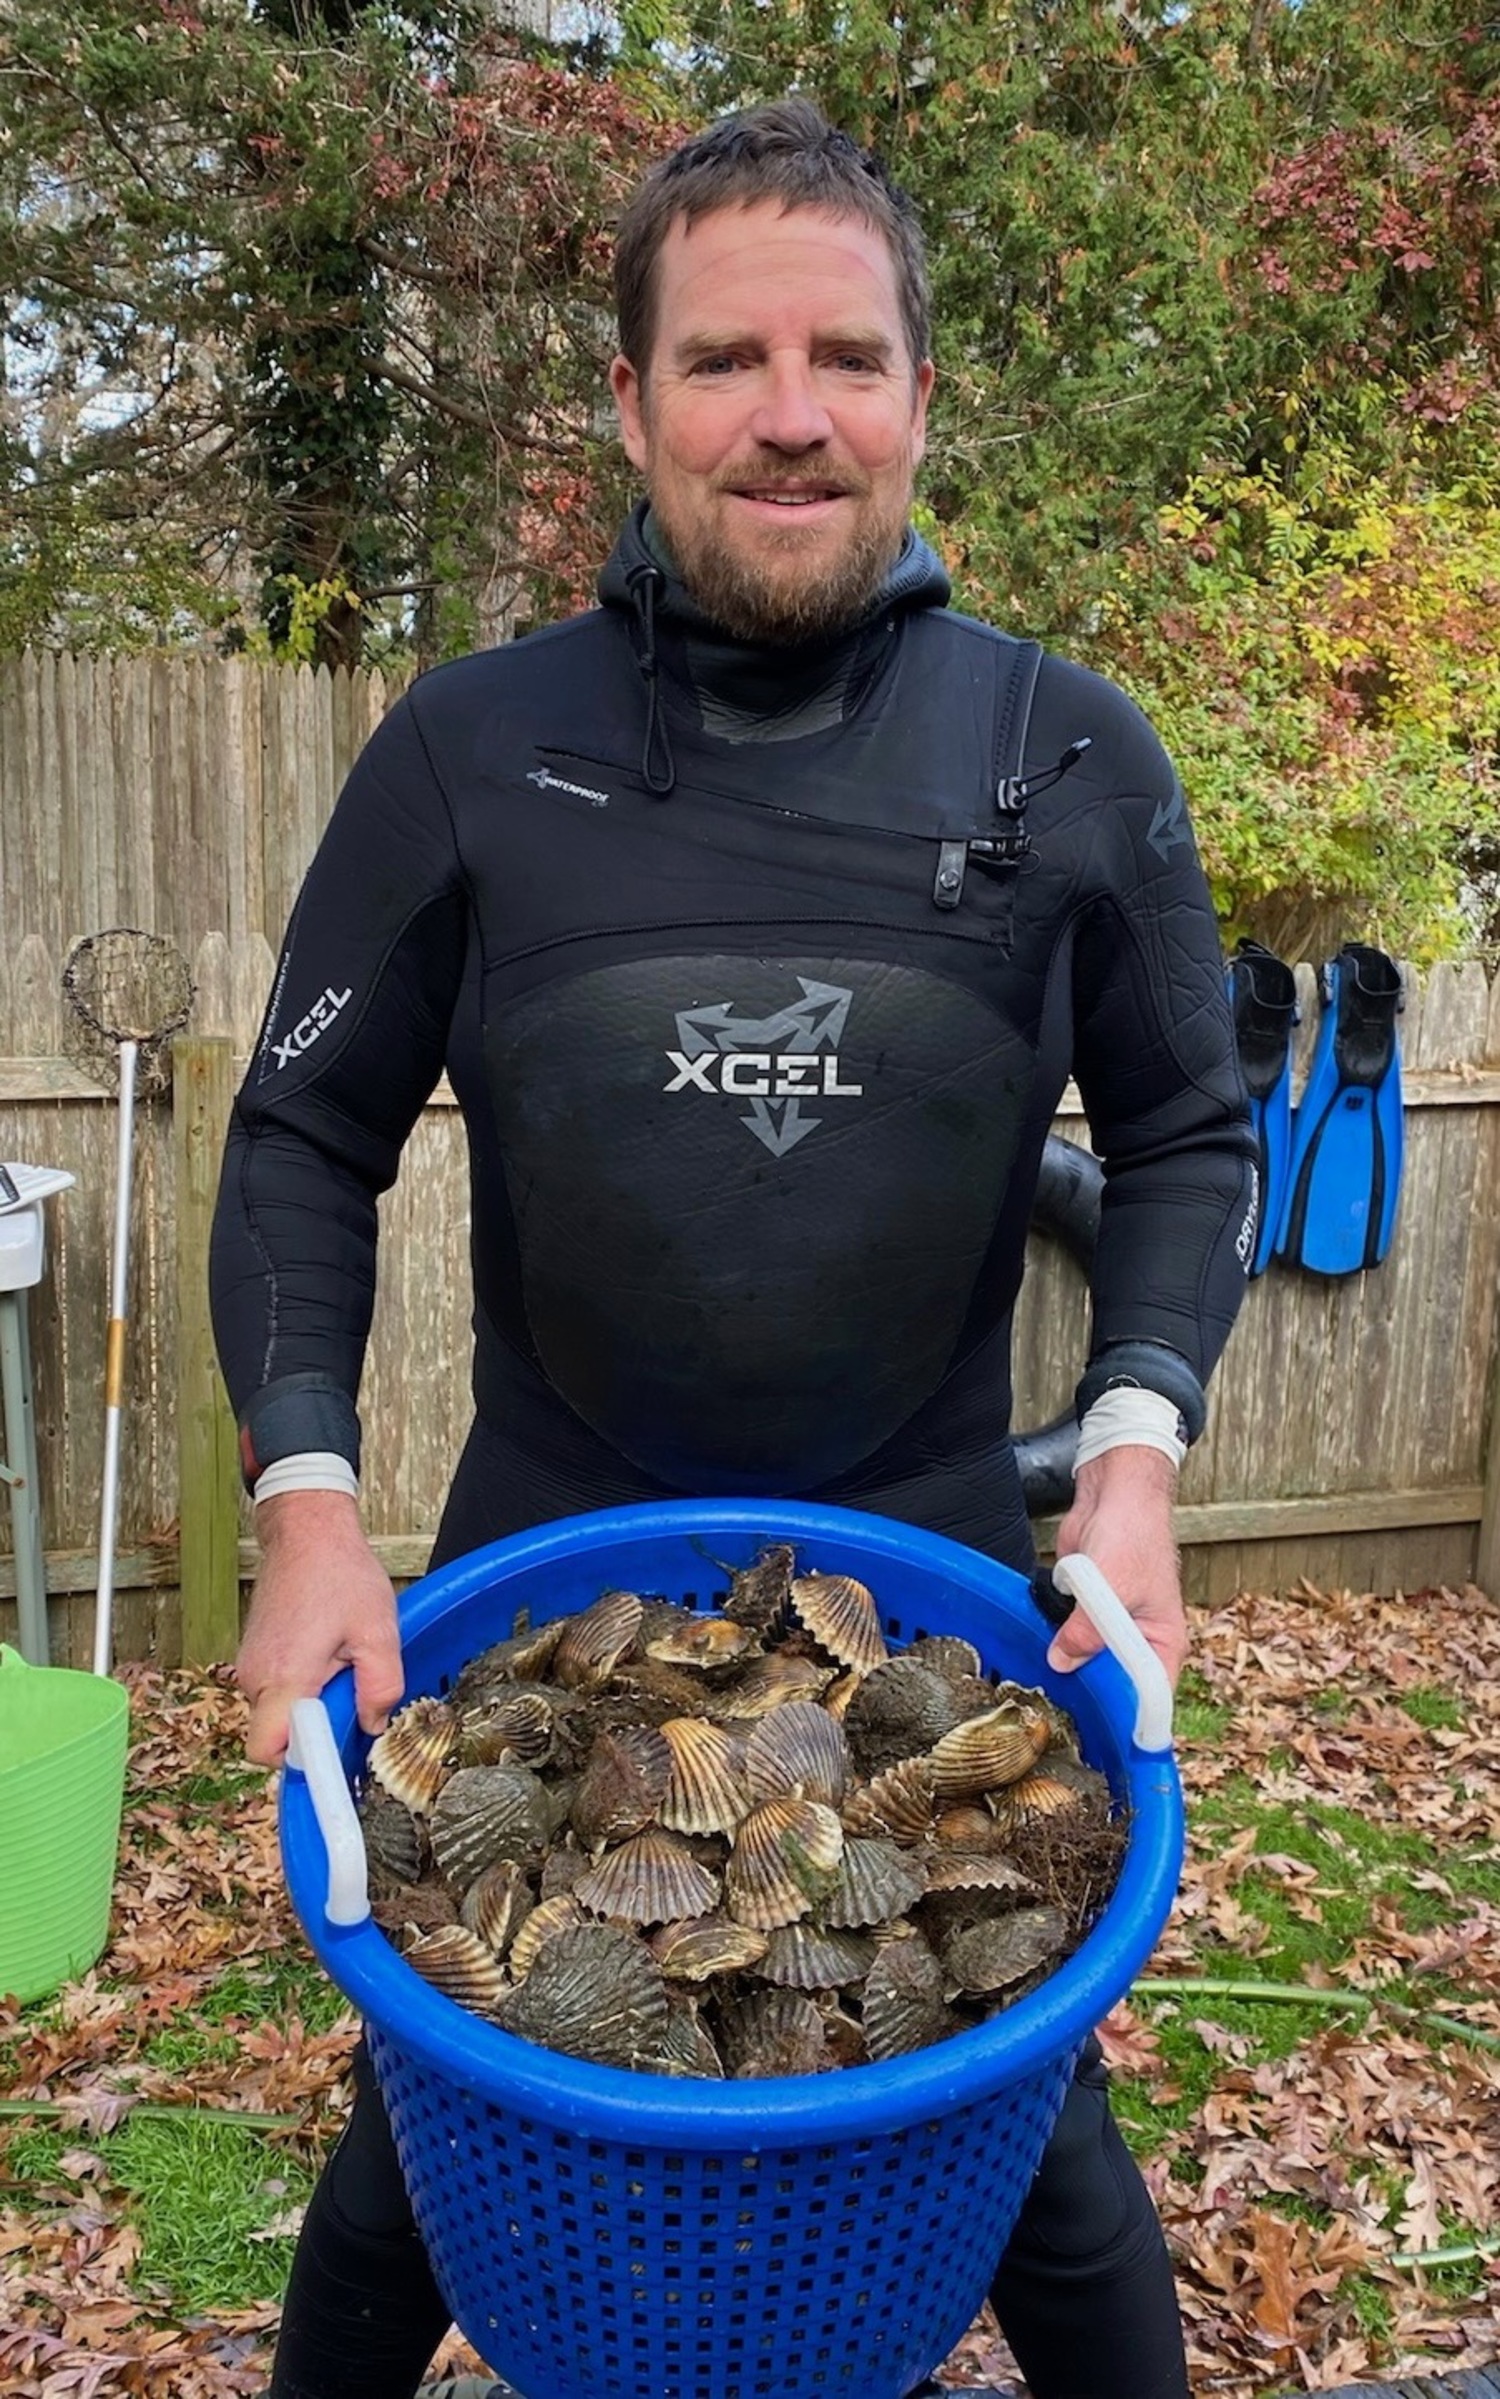 Pete Topping with a bushel of scallops he collected on Monday morning in Southampton.